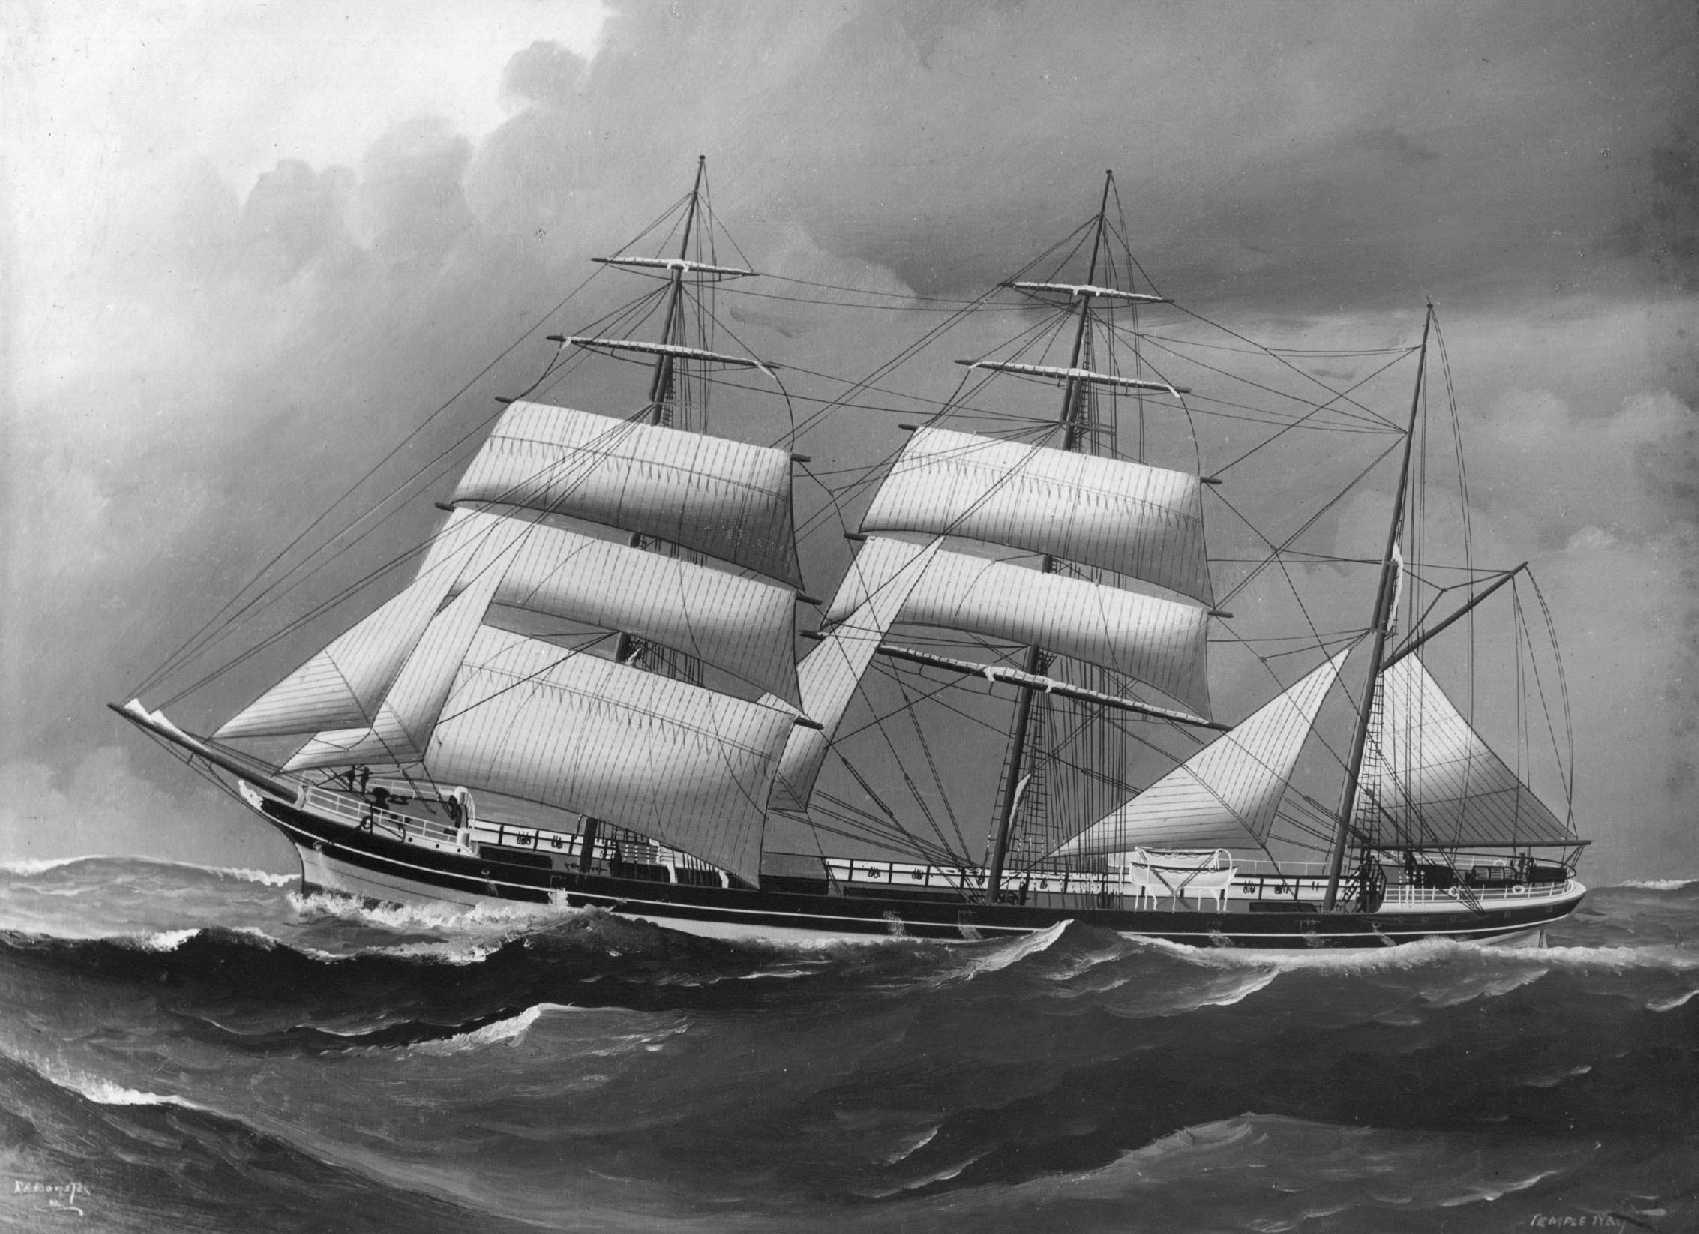 Barque, "Beeswing", Captained by Robert Griffiths.